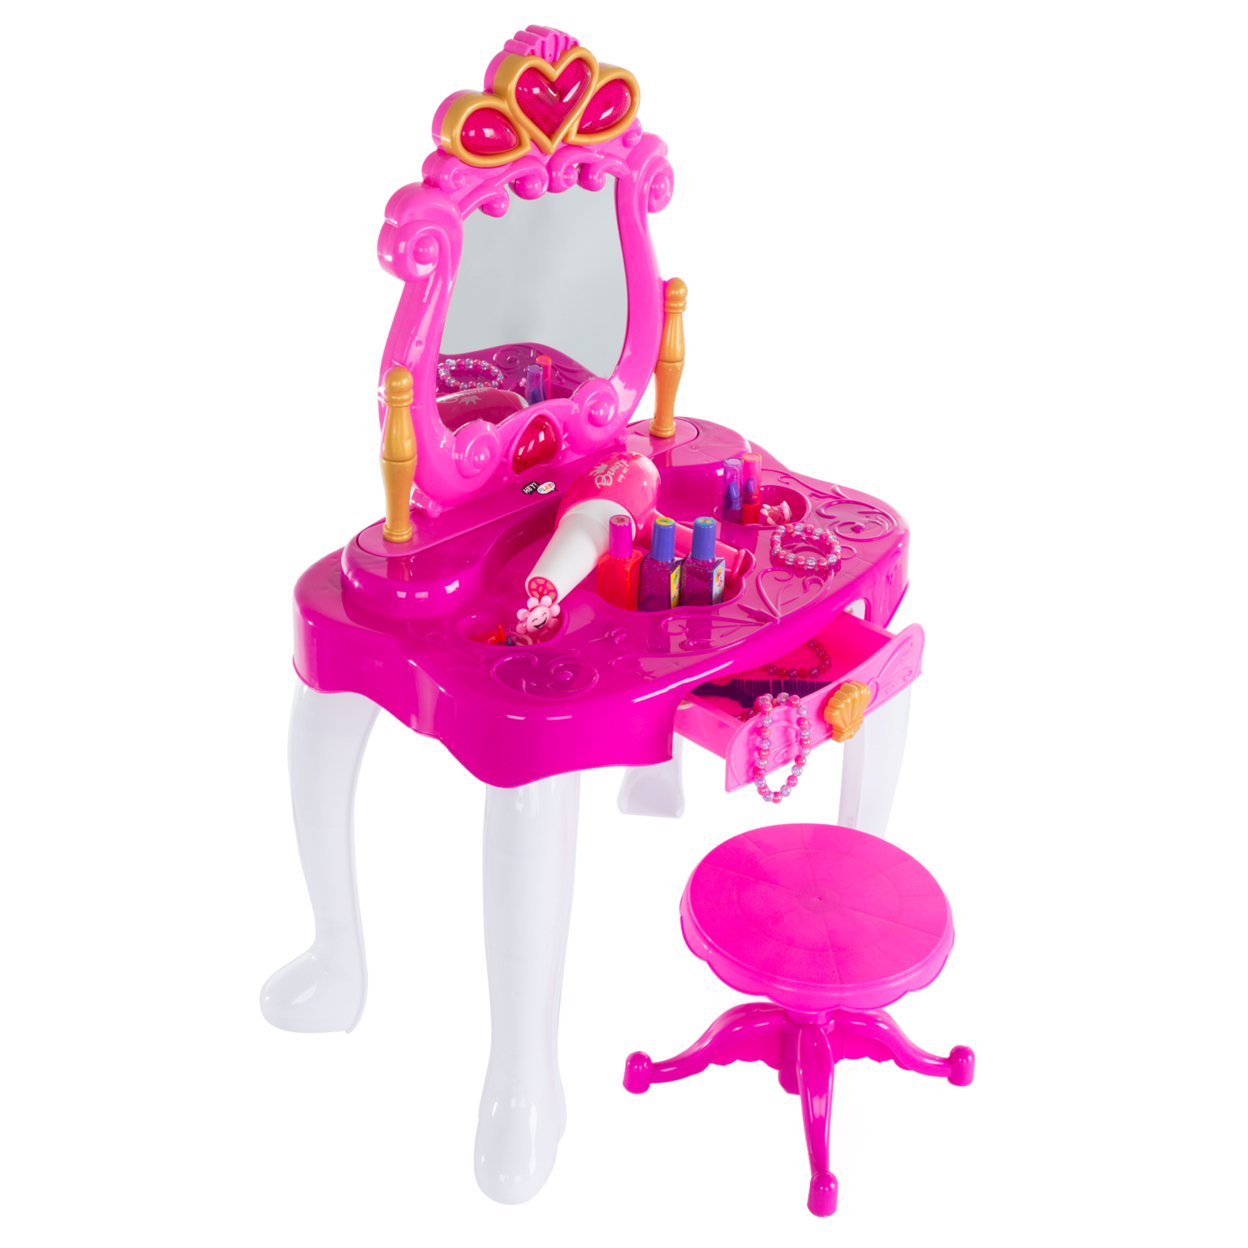 Pretend Play Princess Vanity With Stool Childrens Make Up Table Mirror With Music And Lights